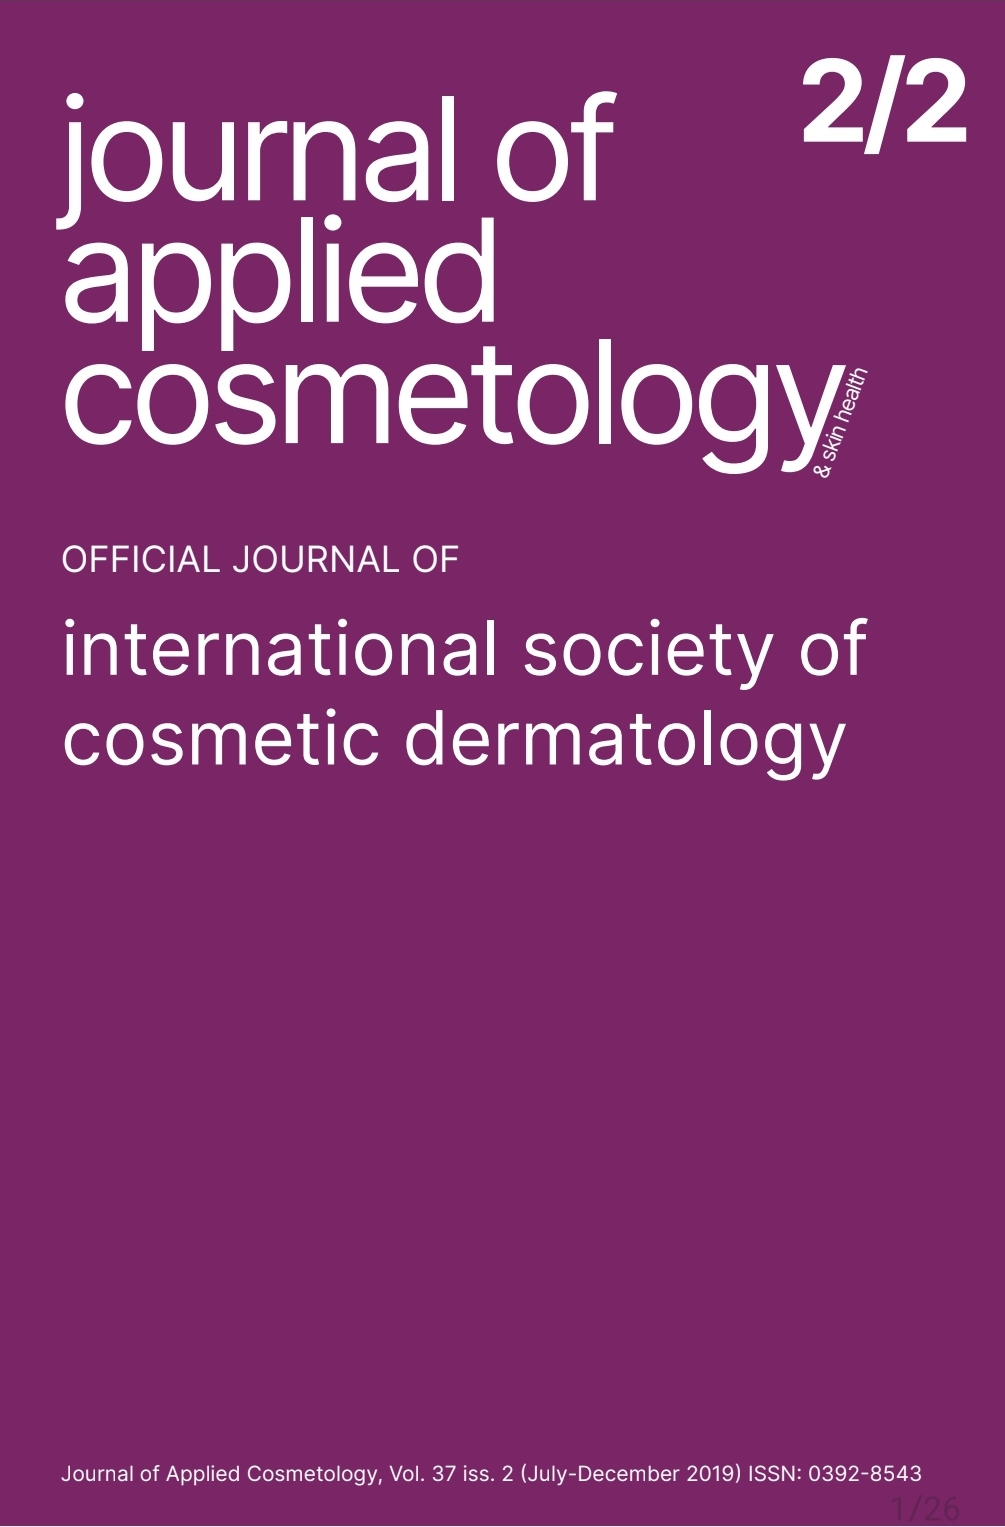 					View Vol. 37 No. 2 (2019): Journal of Applied Cosmetology
				